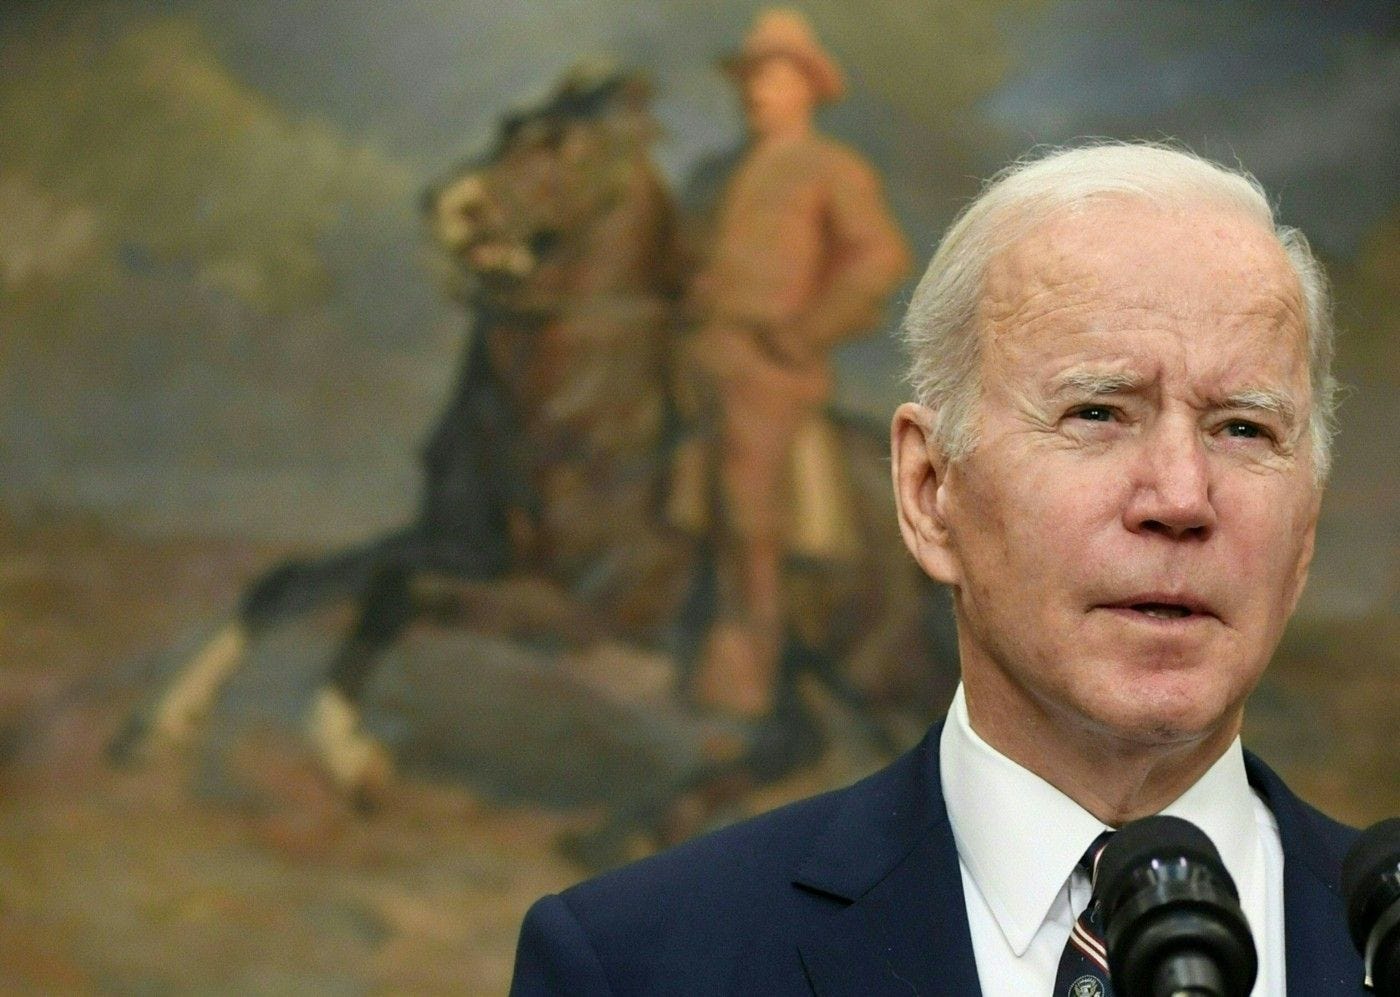 Biden’s approach to intelligence and how it impacts US policies on Ukraine